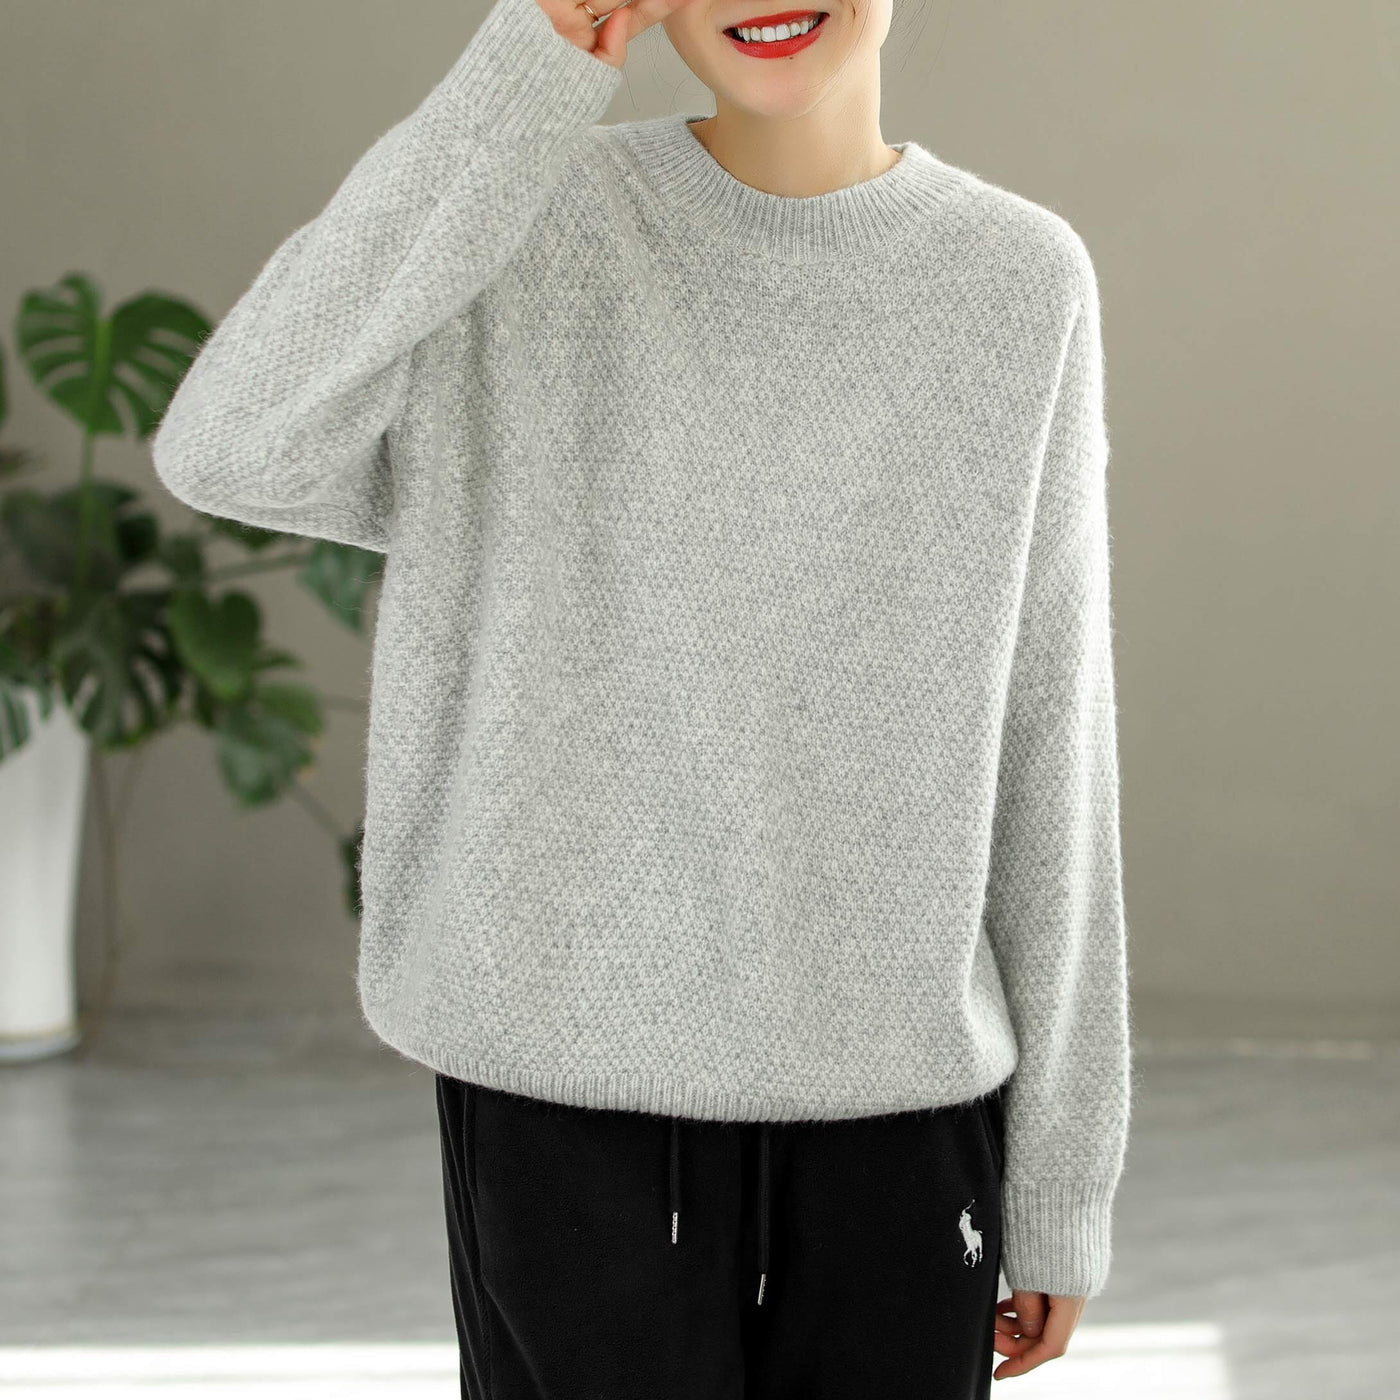 Women Solid Loose Knitted Autumn Winter Warm Sweater Jan 2023 New Arrival One Size Light Gray 